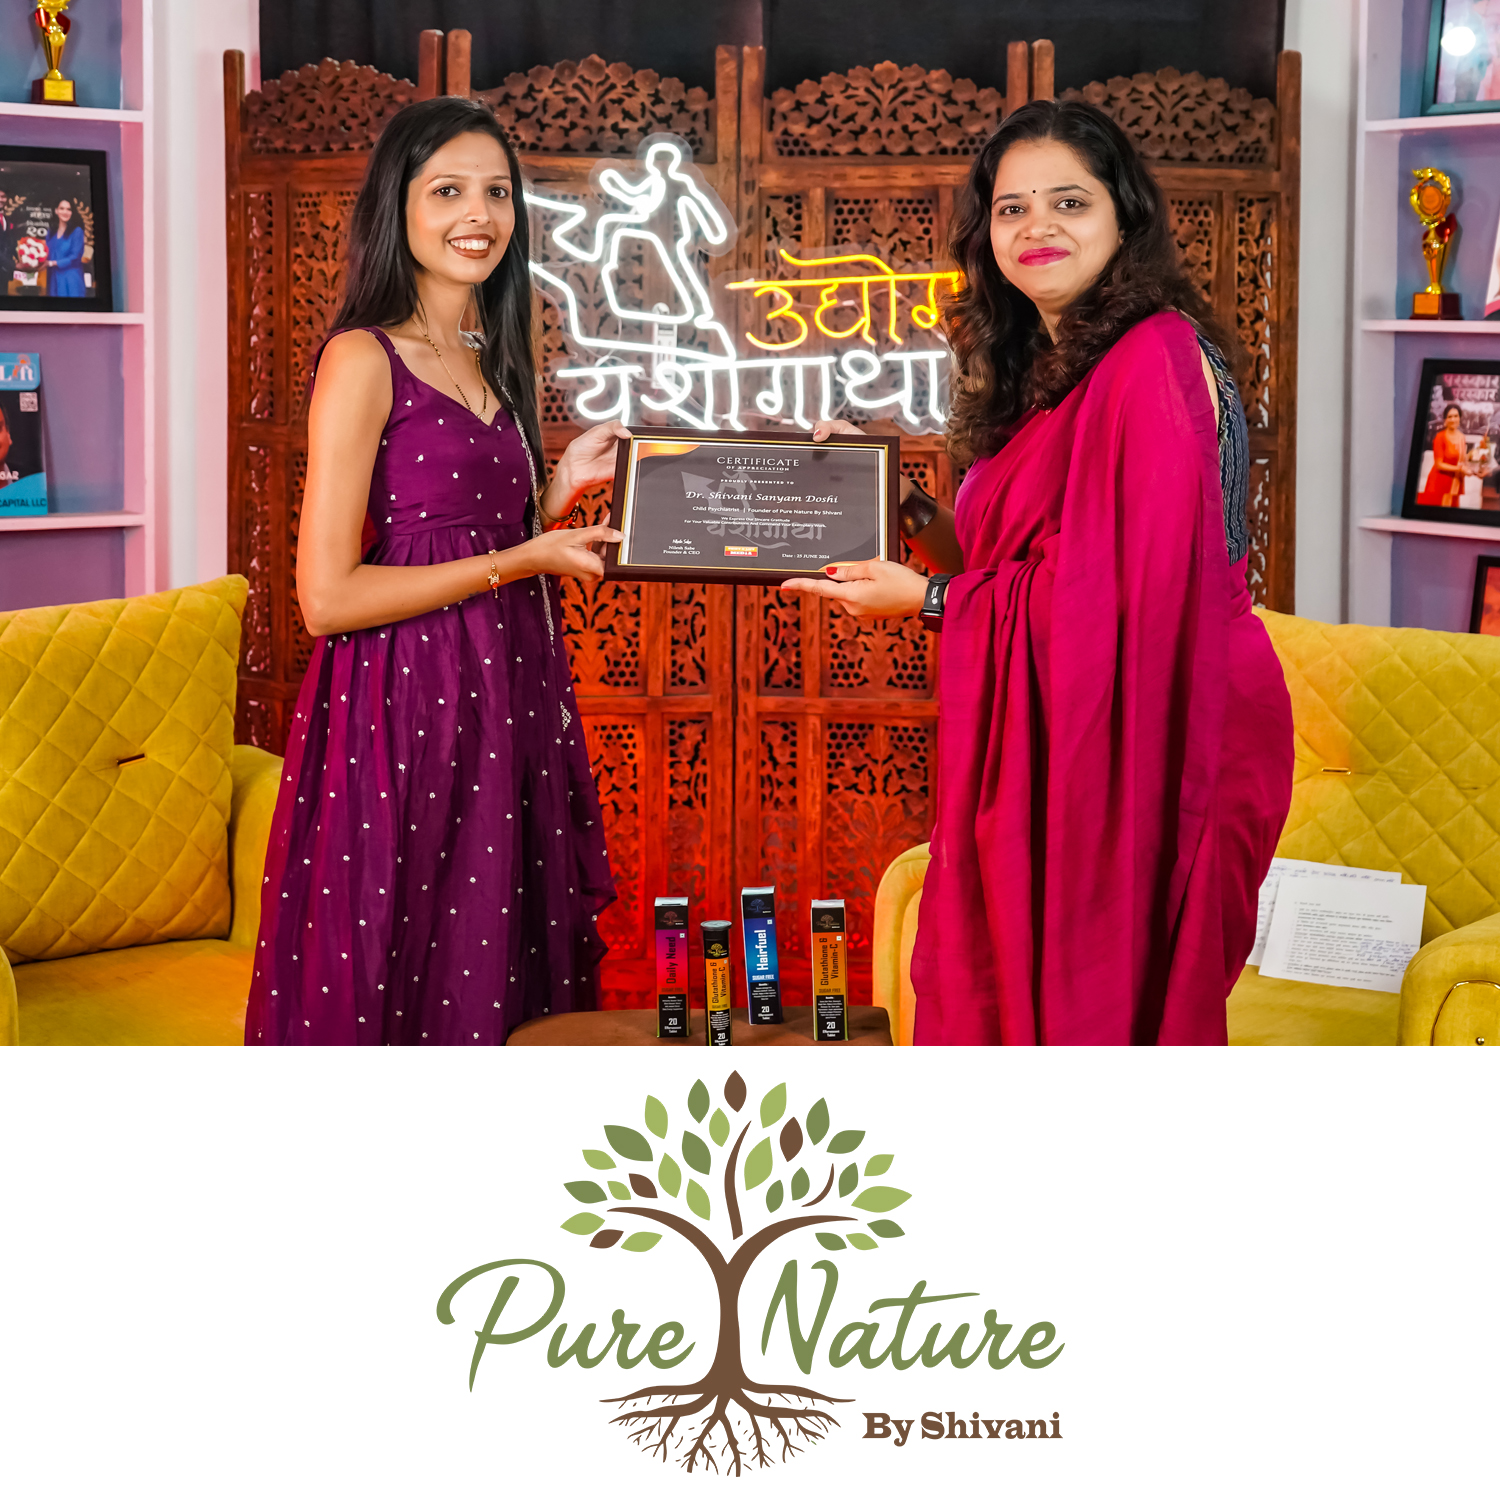 Pure Nature by Shivani: A Journey Towards Natural Beauty